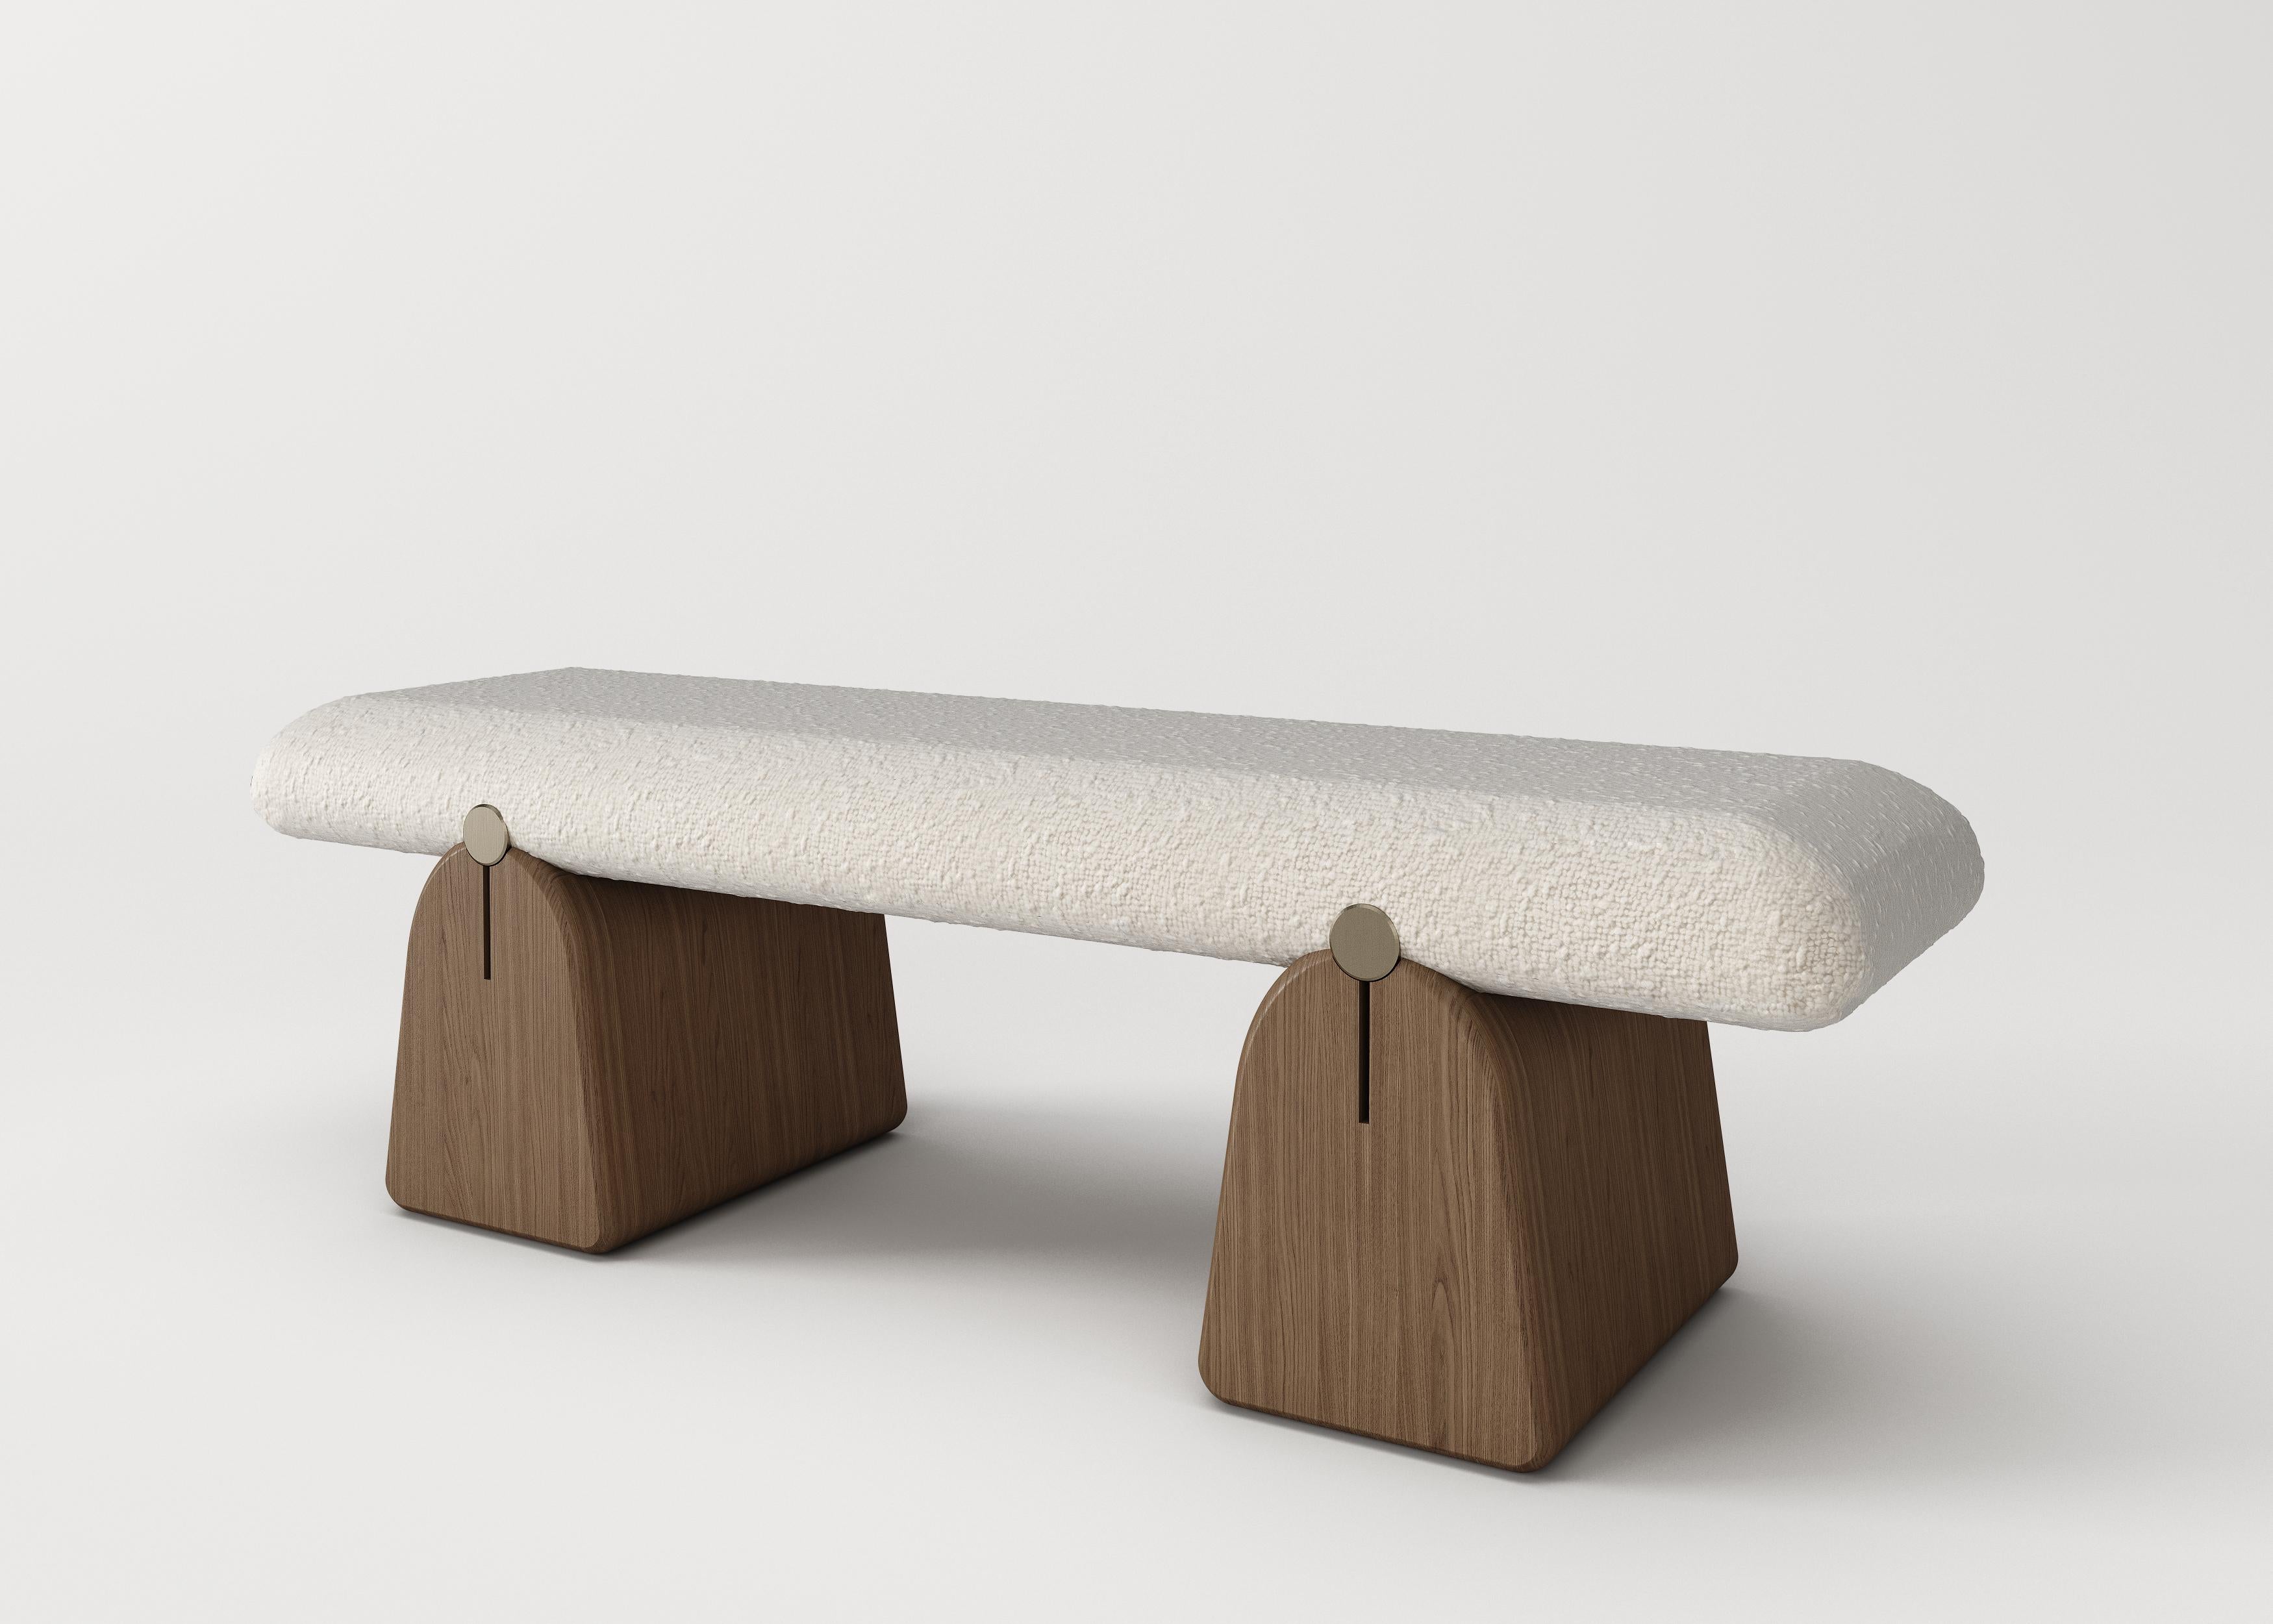 IO bench Signed by Buket Hos¸can Bazman
Dimensions: 140 x 42 x 42 cm
Material: Patinated brass detailed, solid wood legs, bouclé fabric pouf

Available in custom sizing and finishes
Patina application varies in each piece.
 

Buket Hoscan